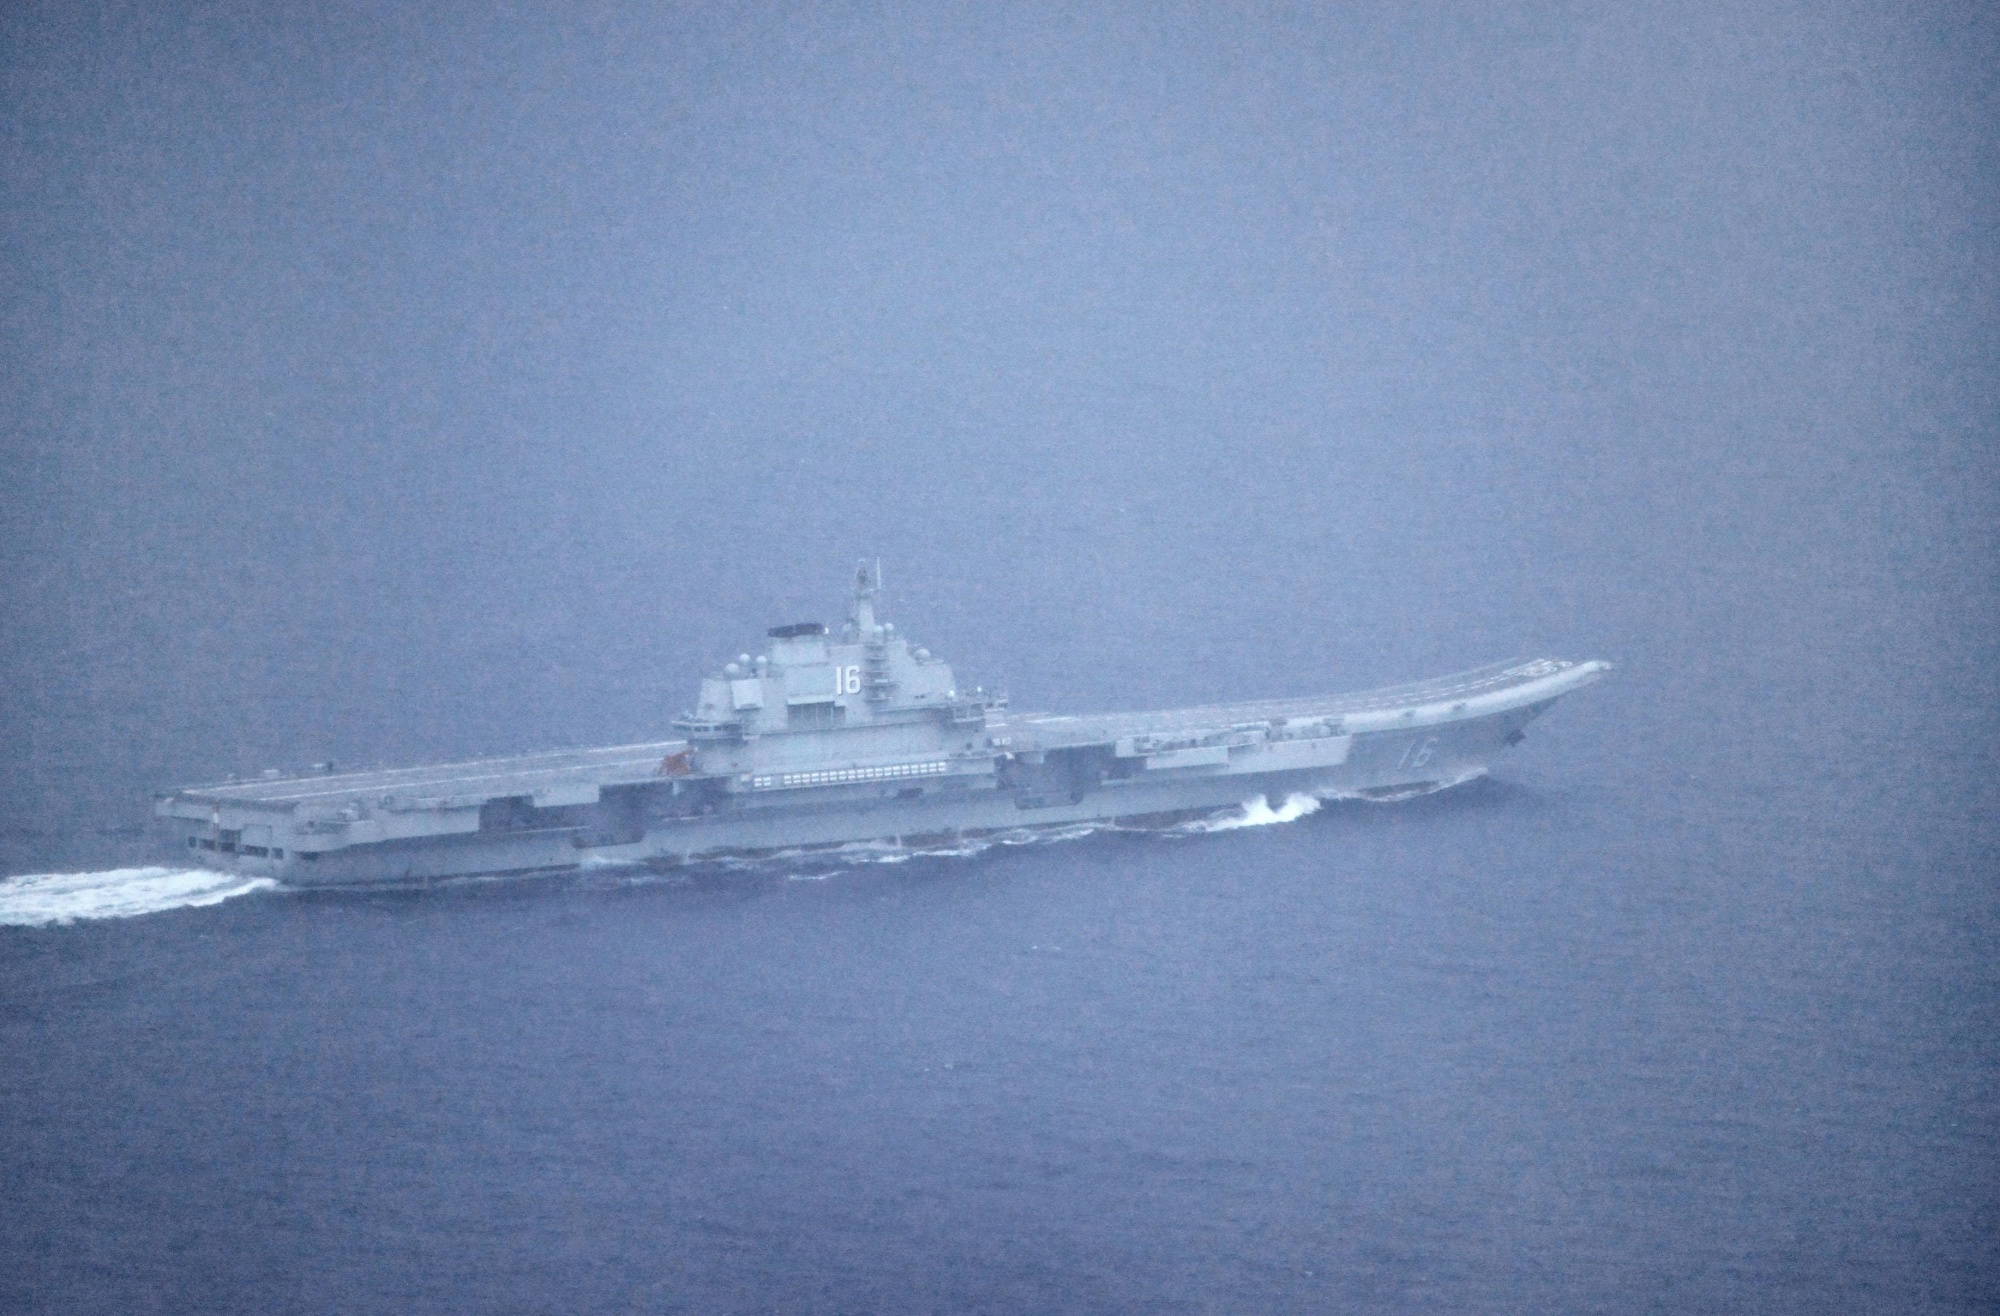 This photo provided by the Defense Ministry shows China's aircraft carrier, the Liaoning, headed to the Pacific on Monday. | KYODO